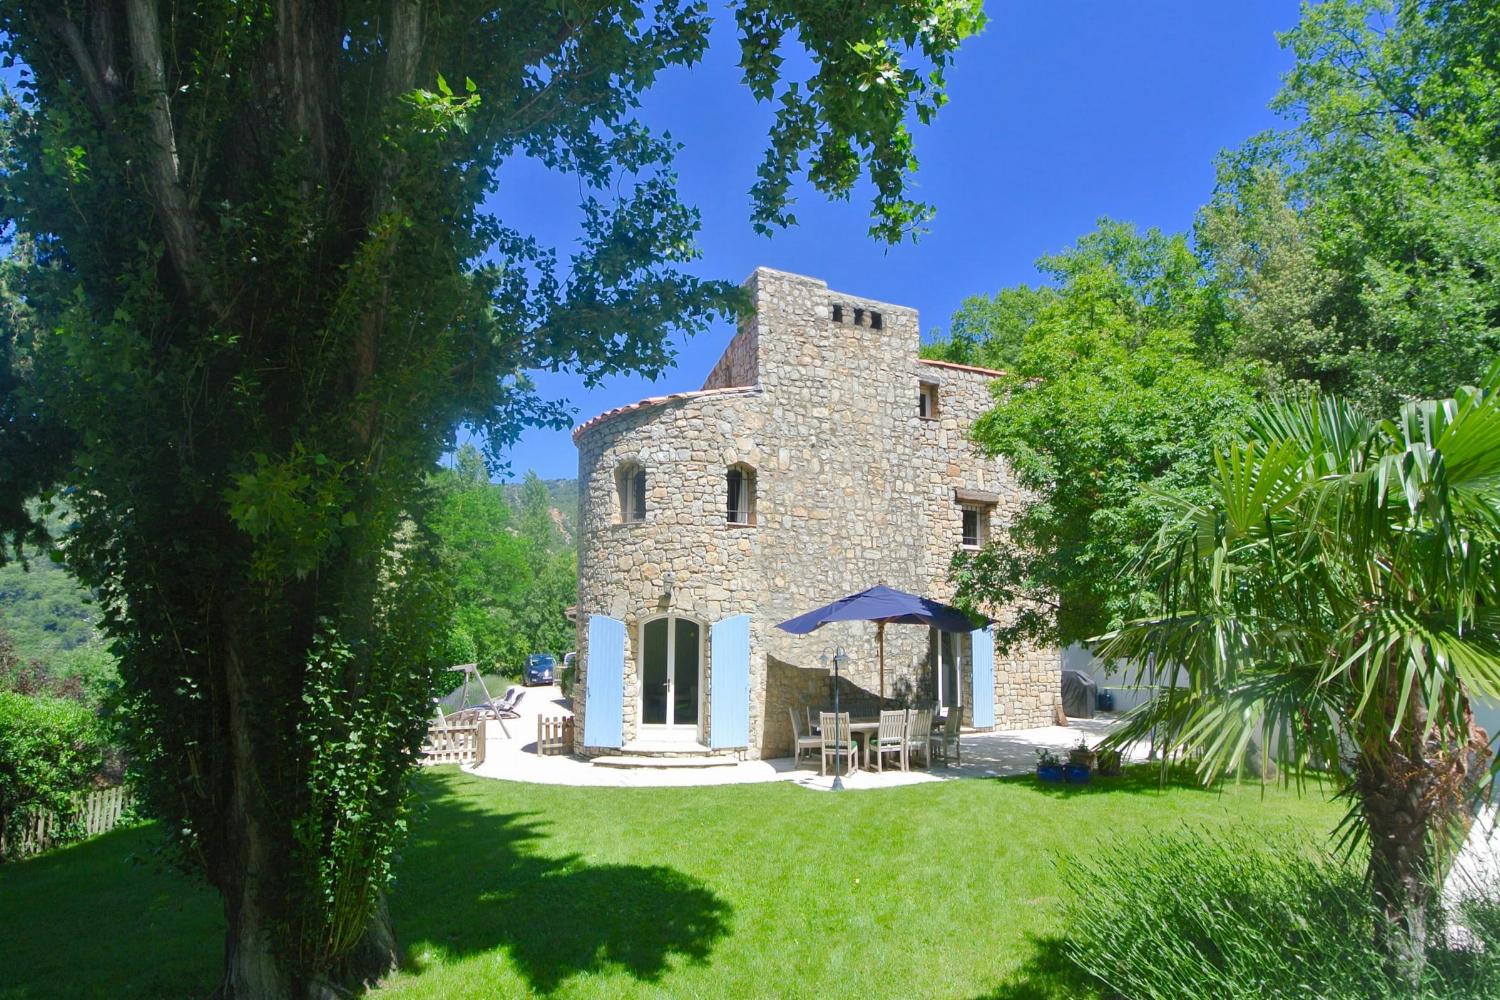 Self-catering home in Provence